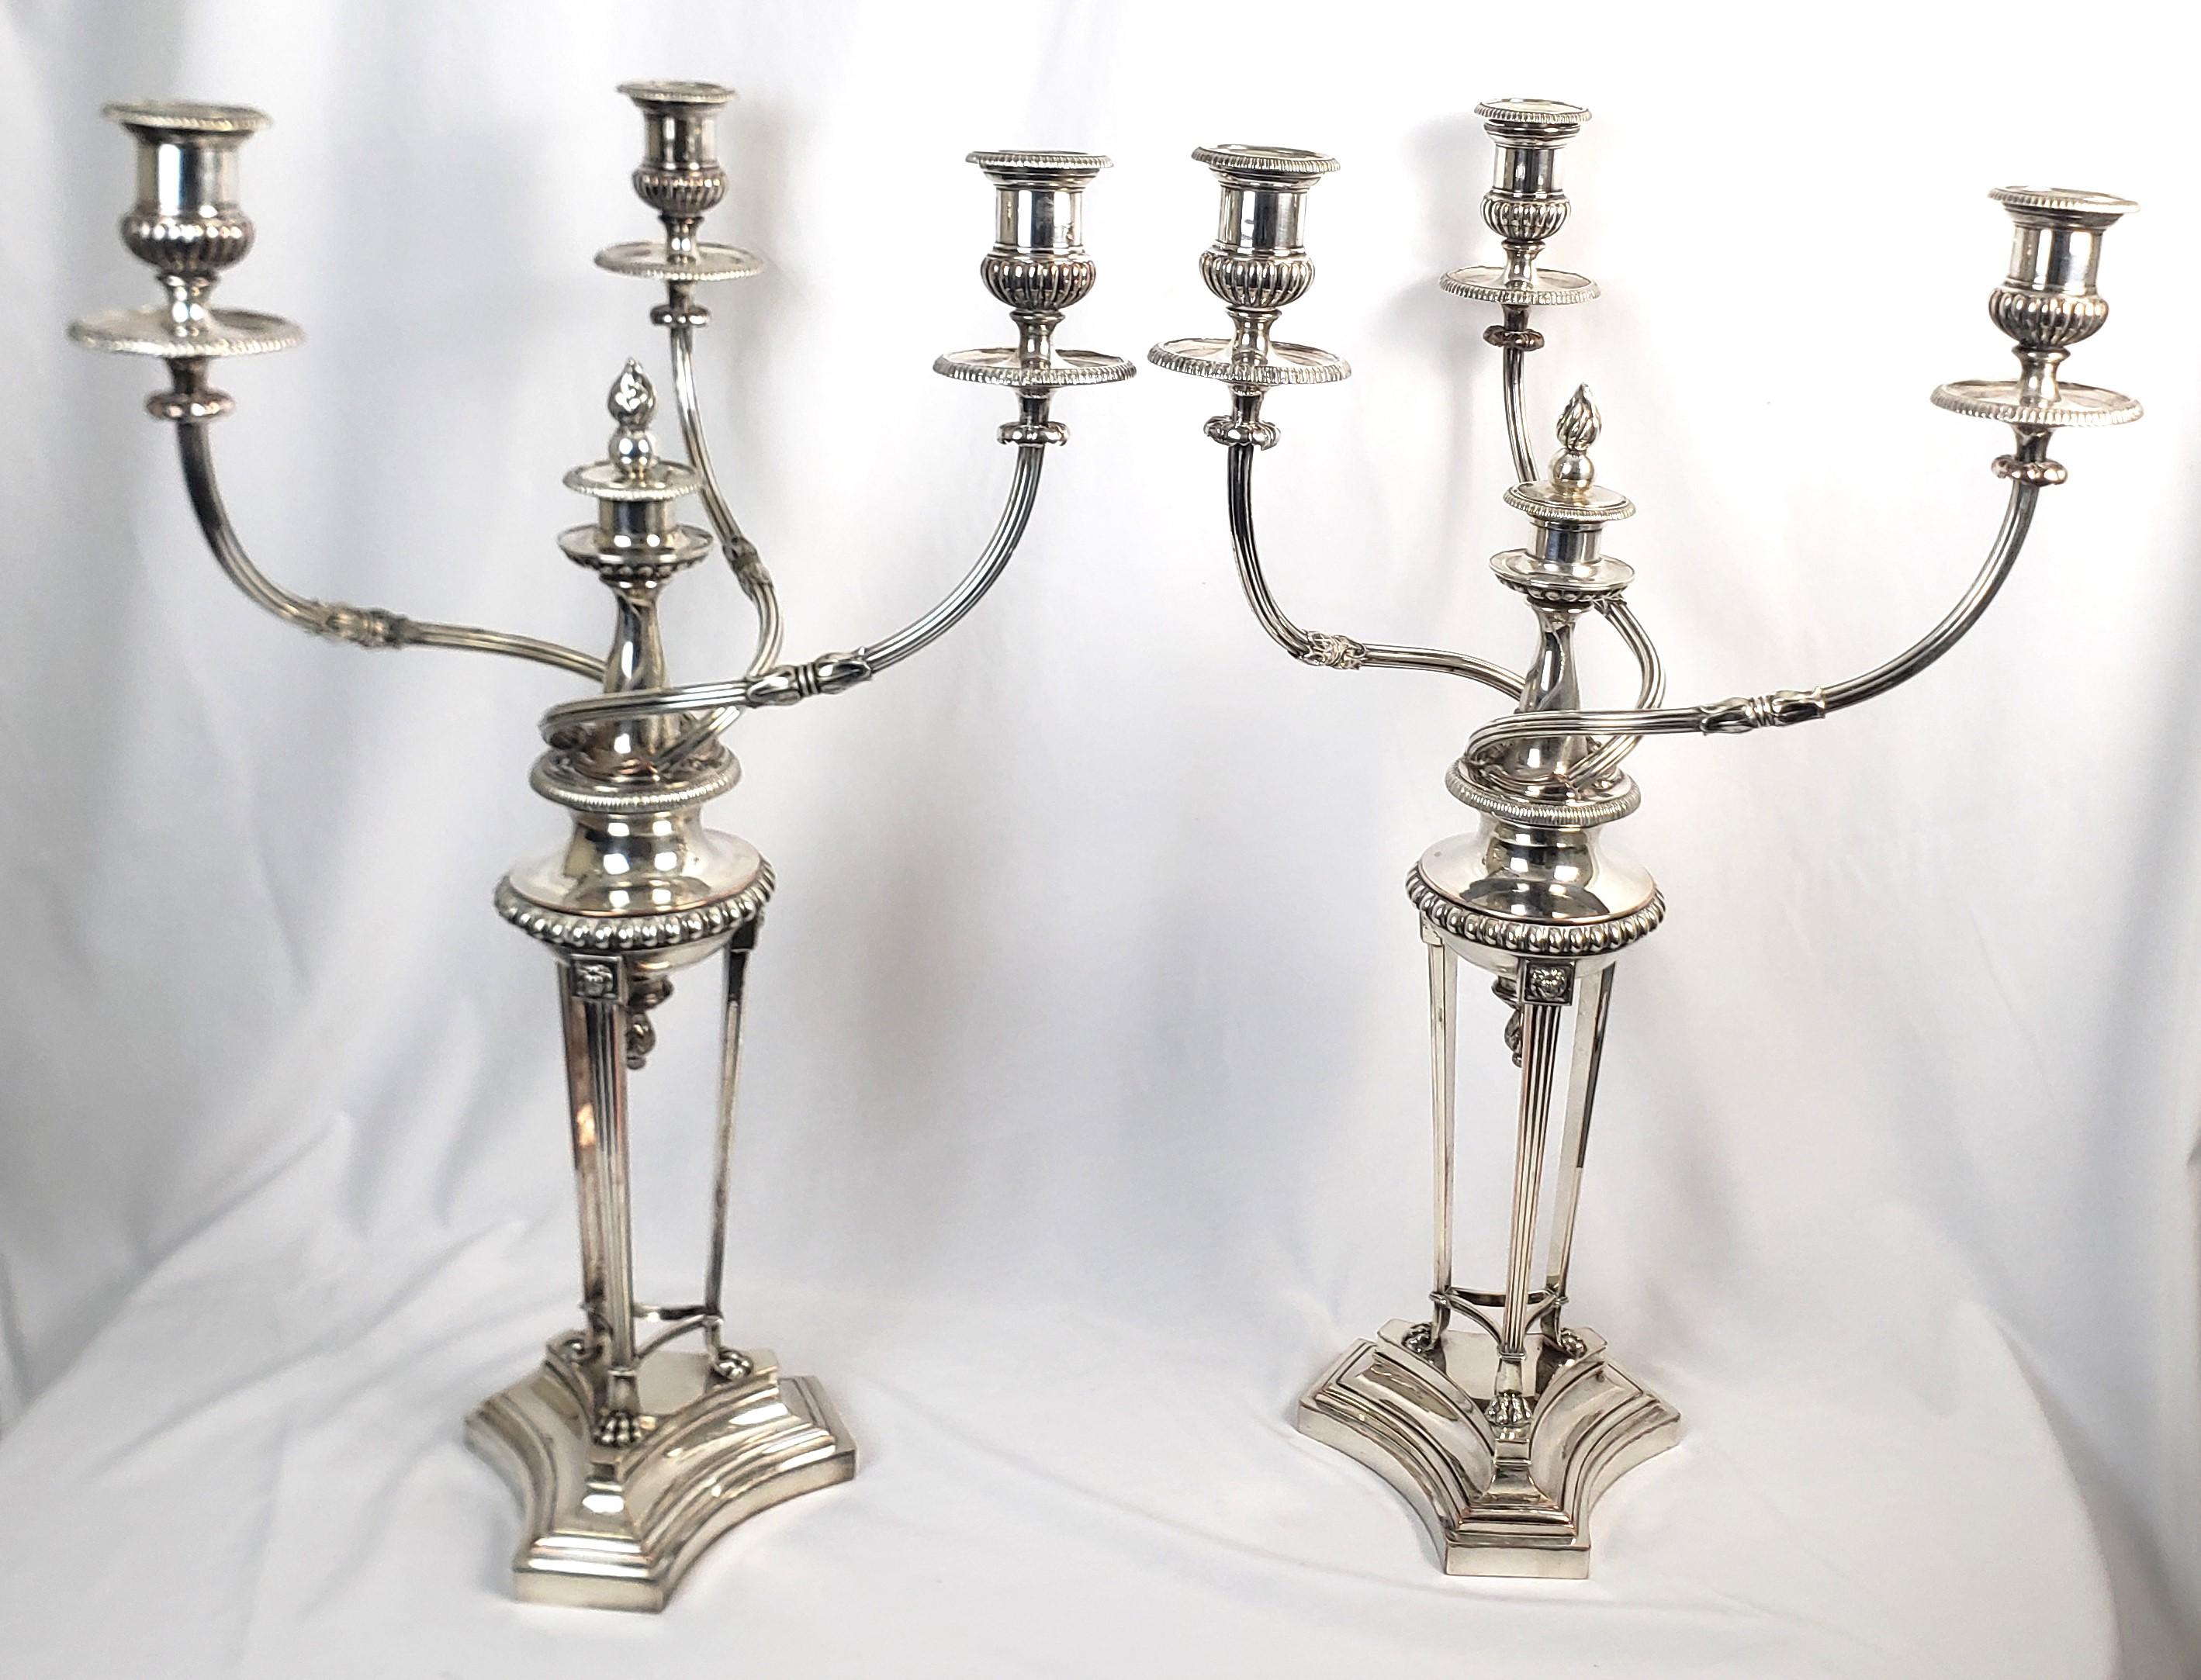 Pair of Huge Antique Matthew Boulton Regency Three Arm Silver Plated Candelabras For Sale 2